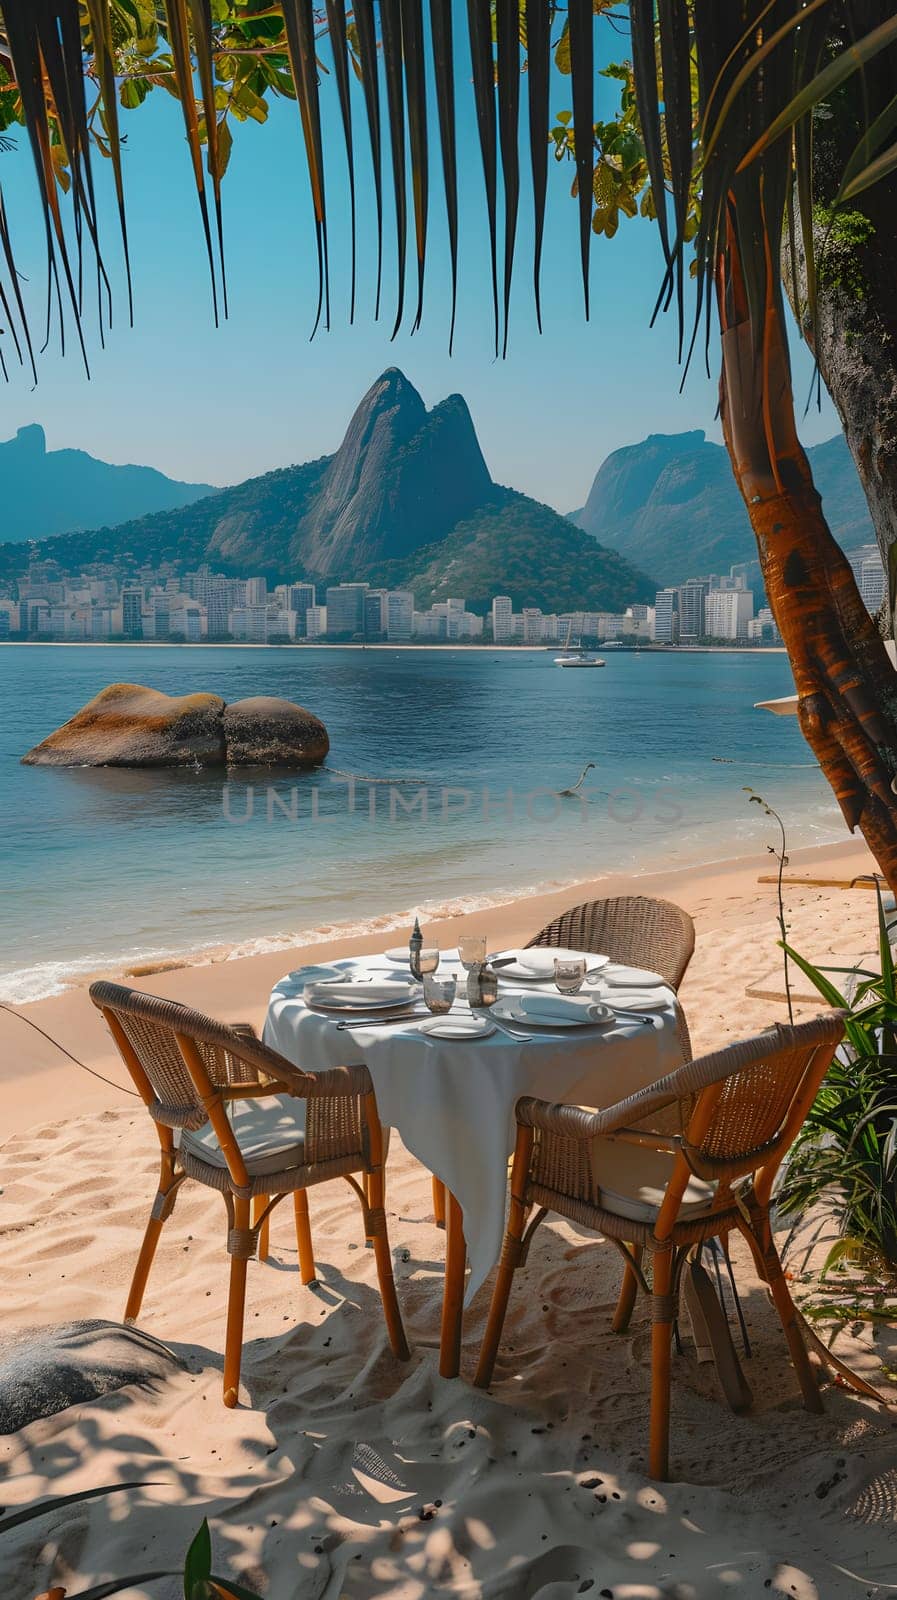 Enjoy the stunning natural landscape of a beach with azure water, mountains in the background, and a table and chairs surrounded by trees and plants, perfect for outdoor furniture travel experiences